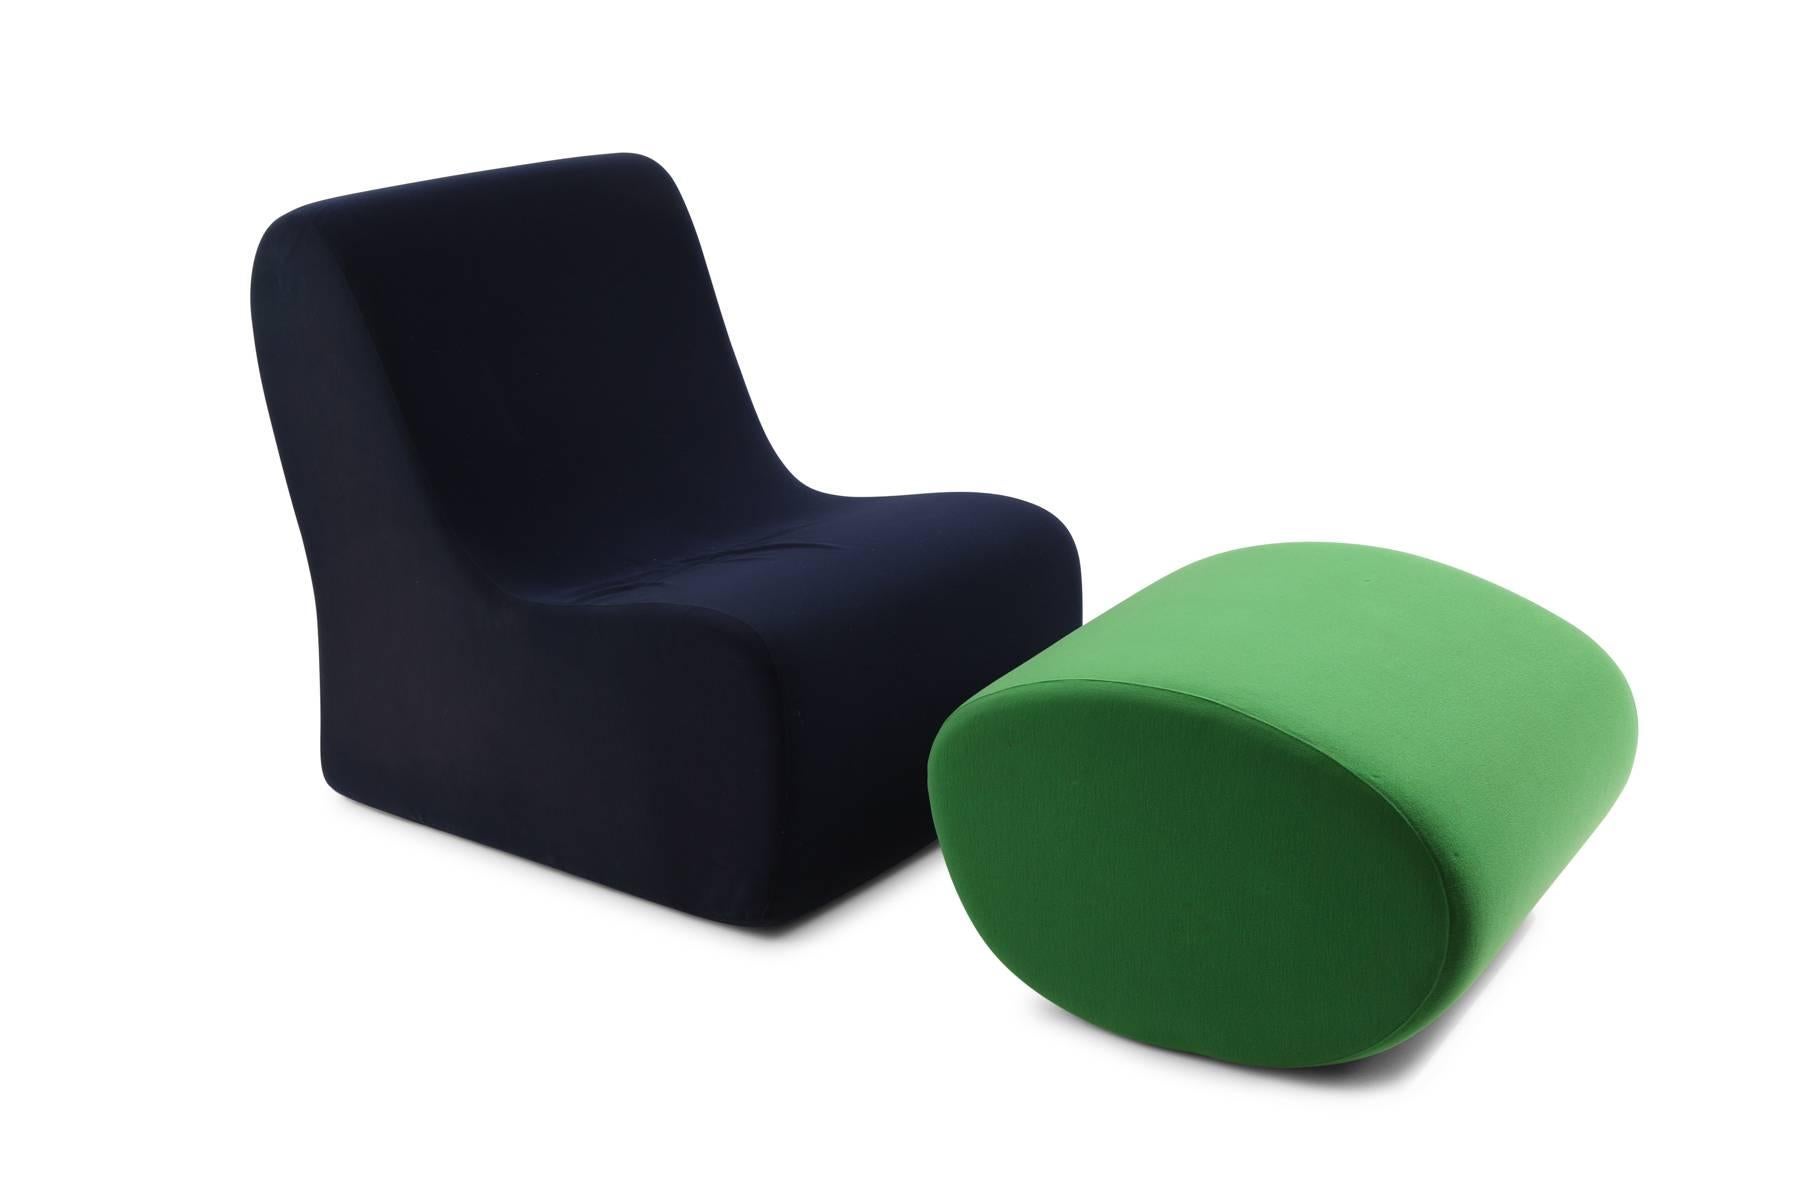 Rare Malitte sofa by Roberto Matta for Knoll circa late 1960s. This example is all original in its navy and vibrant green. This iconic seating arrangement has infinite possibilities and is composed of a two seater bench three chairs and an ottoman.